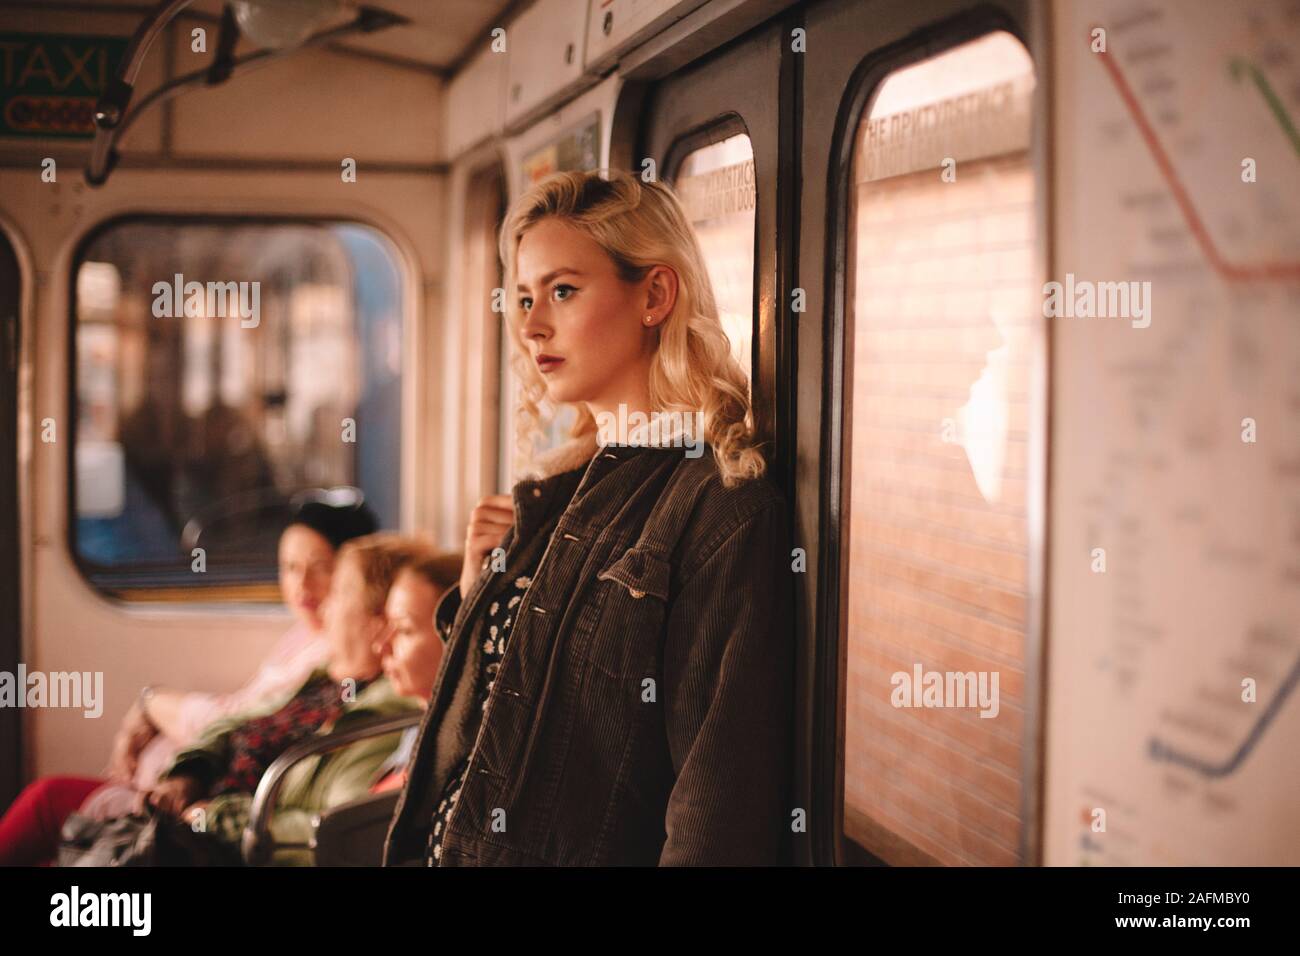 Young thoughtful woman traveling in subway train Stock Photo